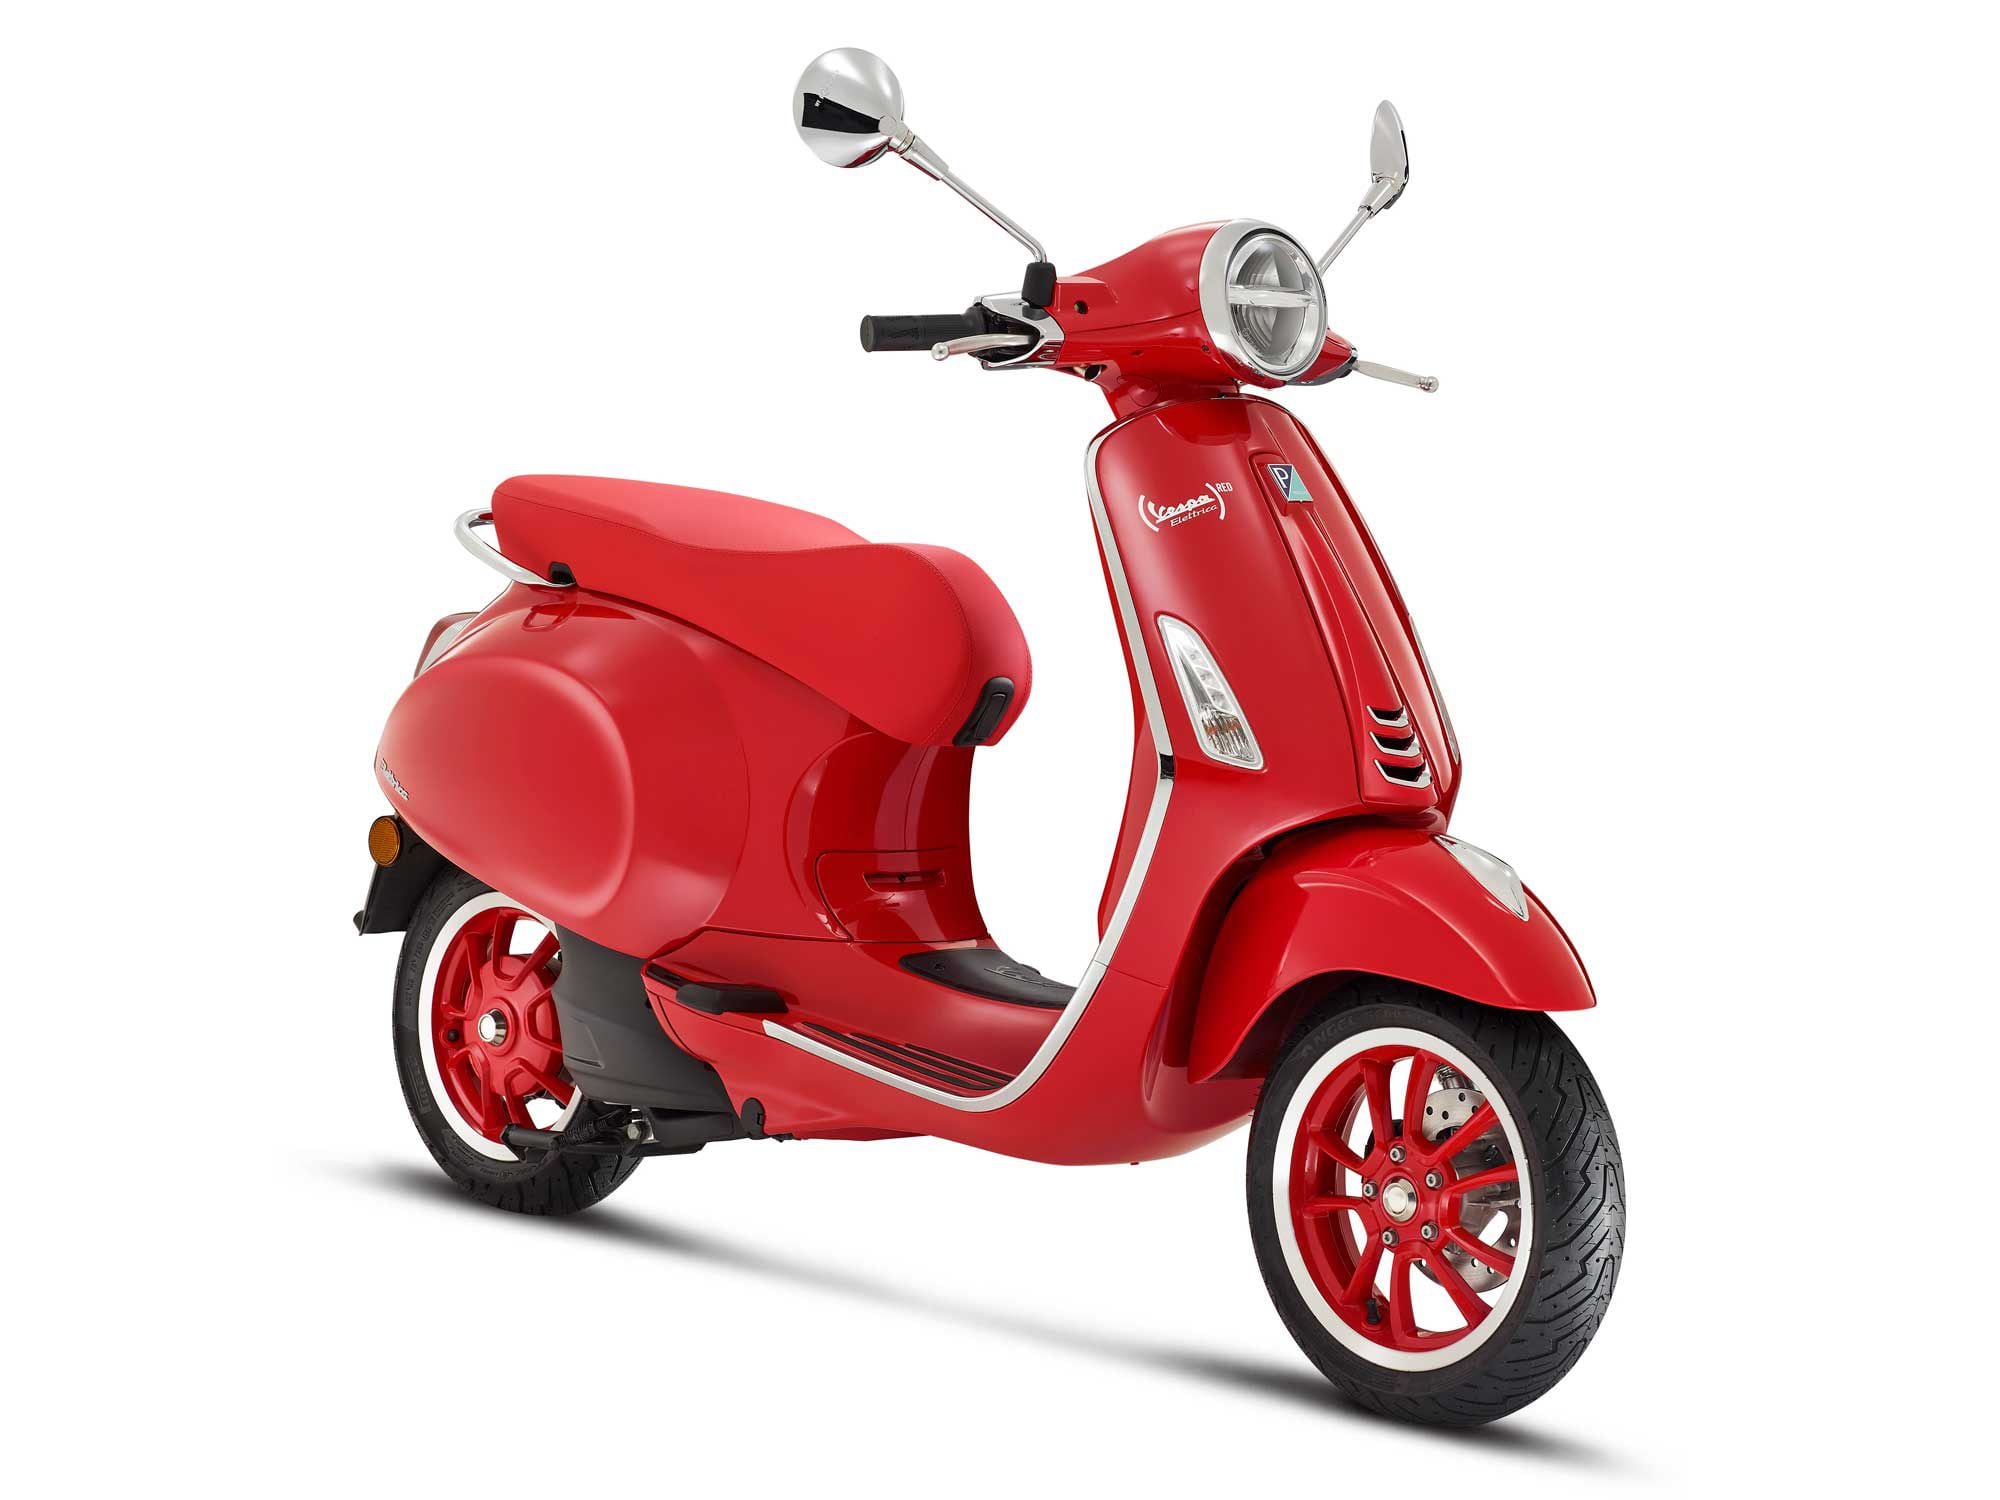 One hundred dollars from each (Vespa Elettrica) RED sold will go to assist those affected by AIDS and COVID-19.